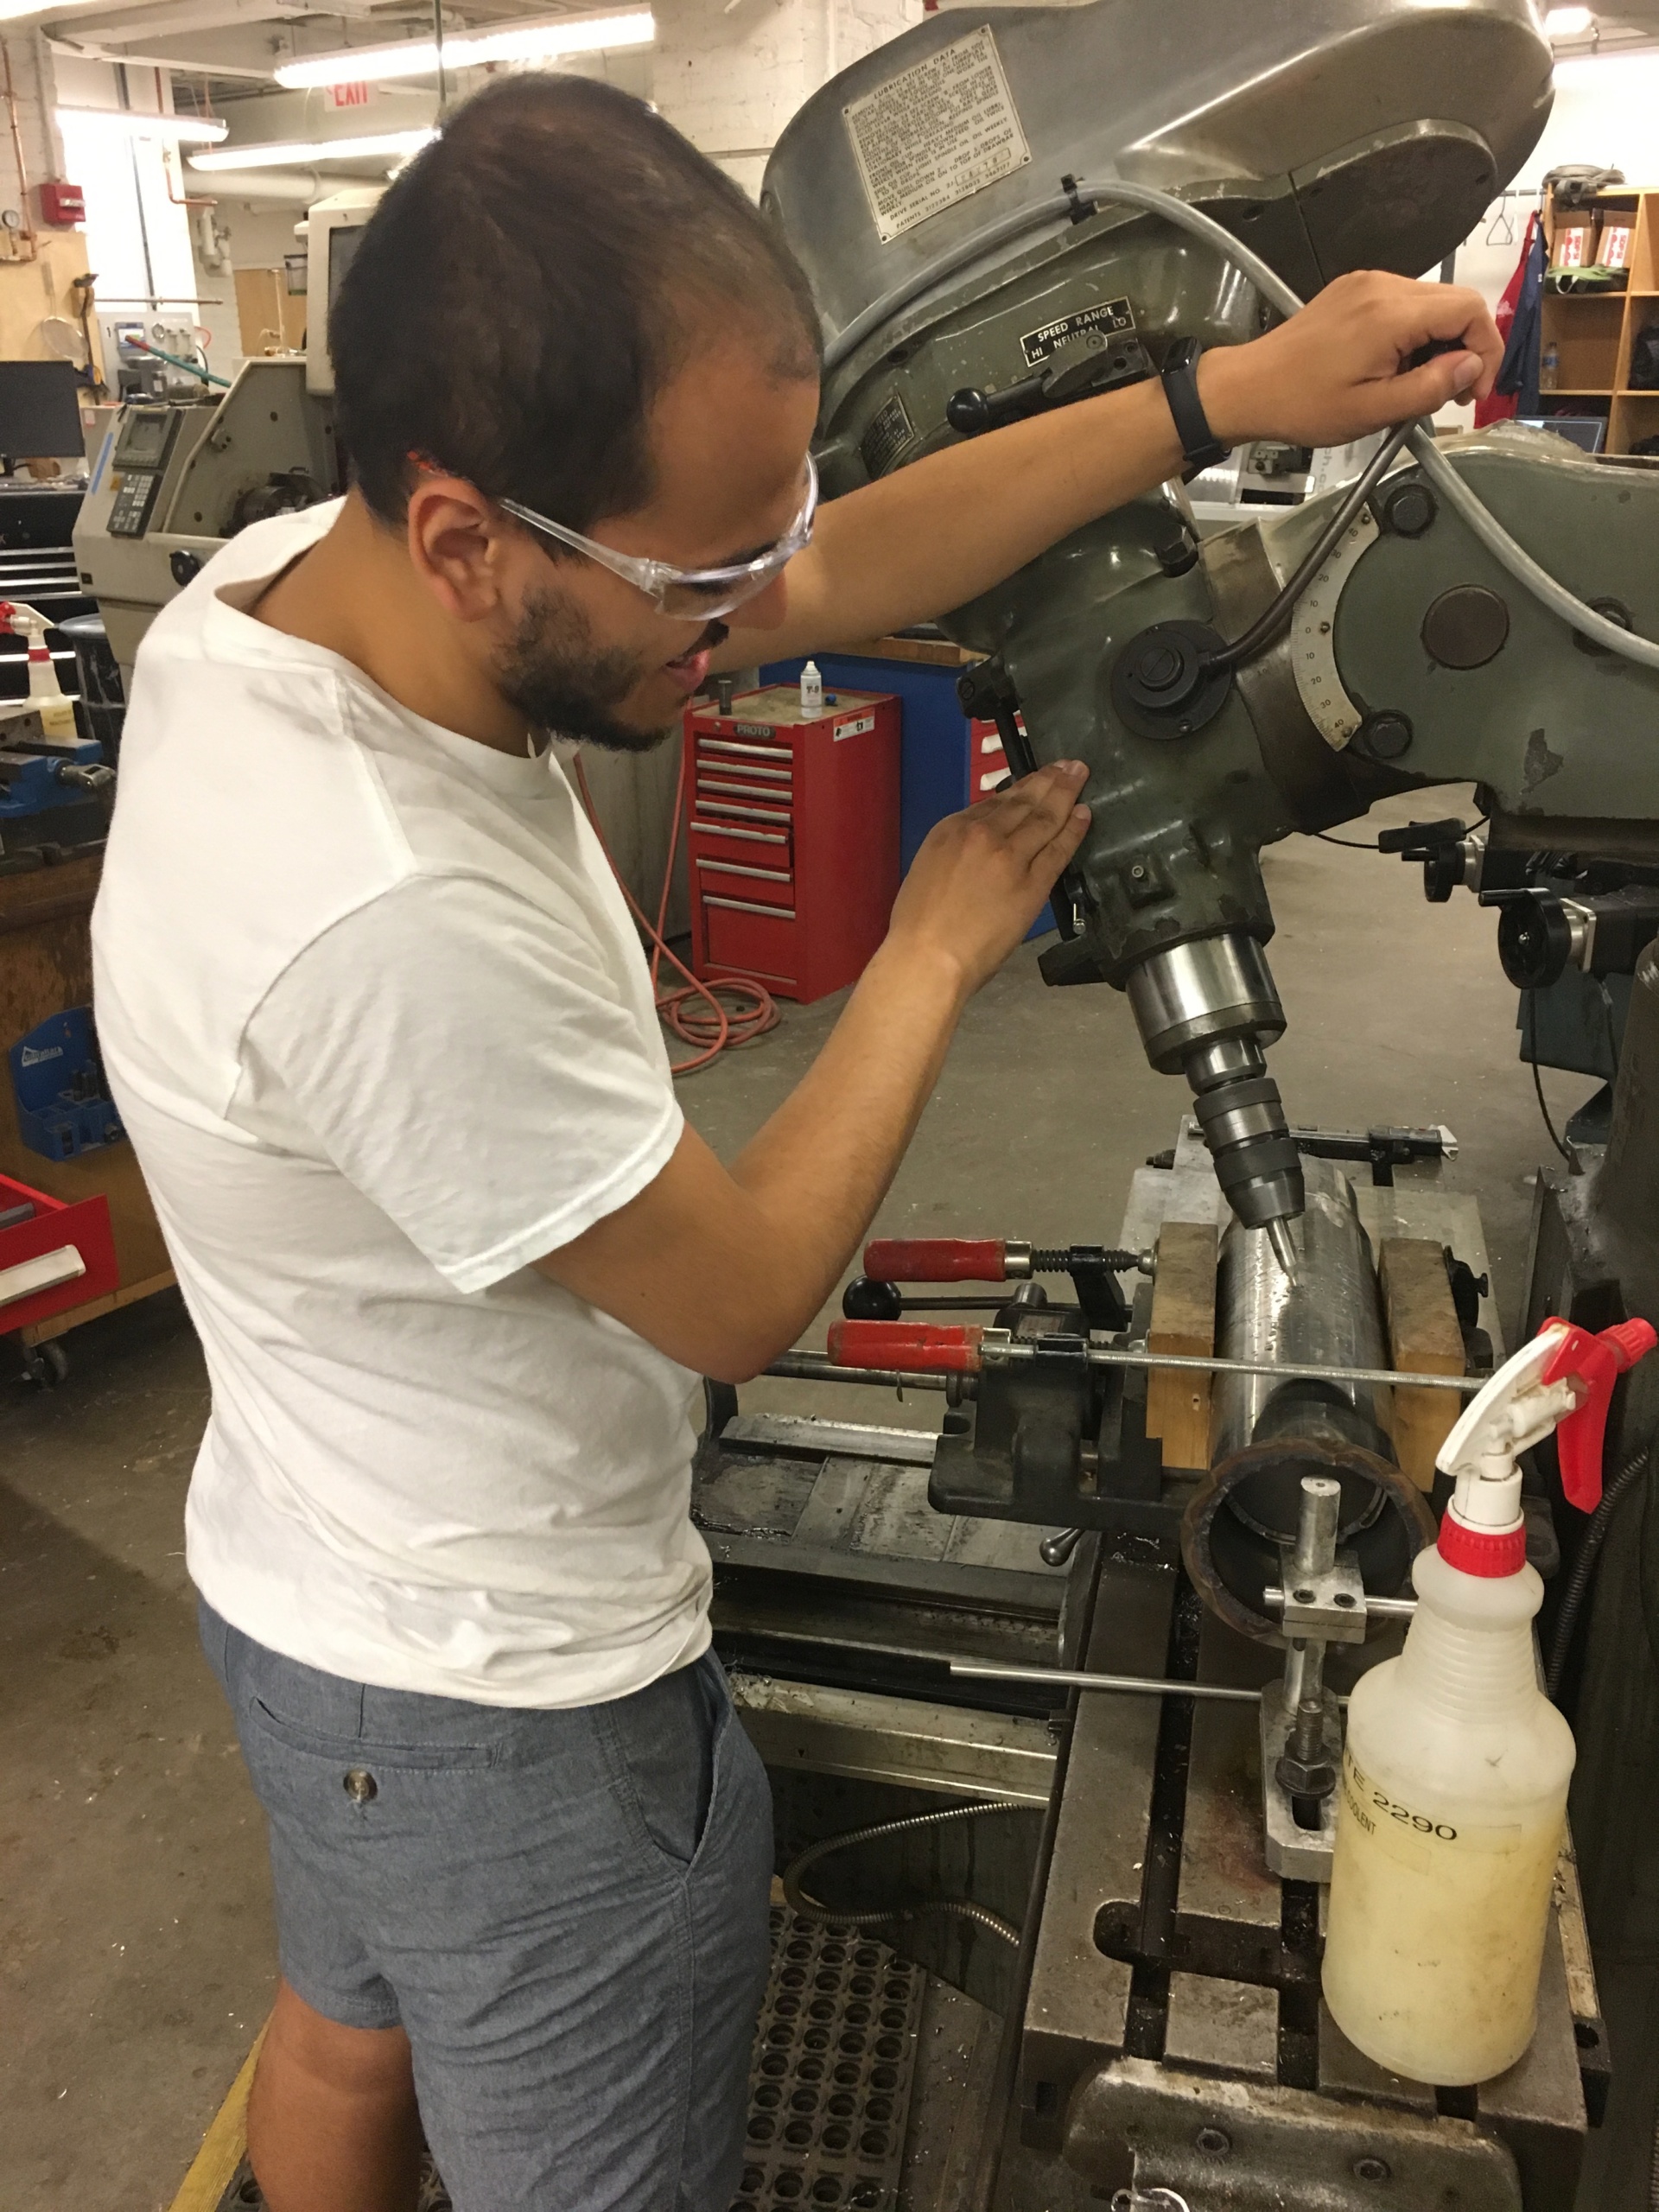 Islam is a member of a small team designing an efficient way to create energy from the combustion of human waste. Pictured here, he is using a compound angle setup on the Bridgeport mill to drill angled holes for air circulation.